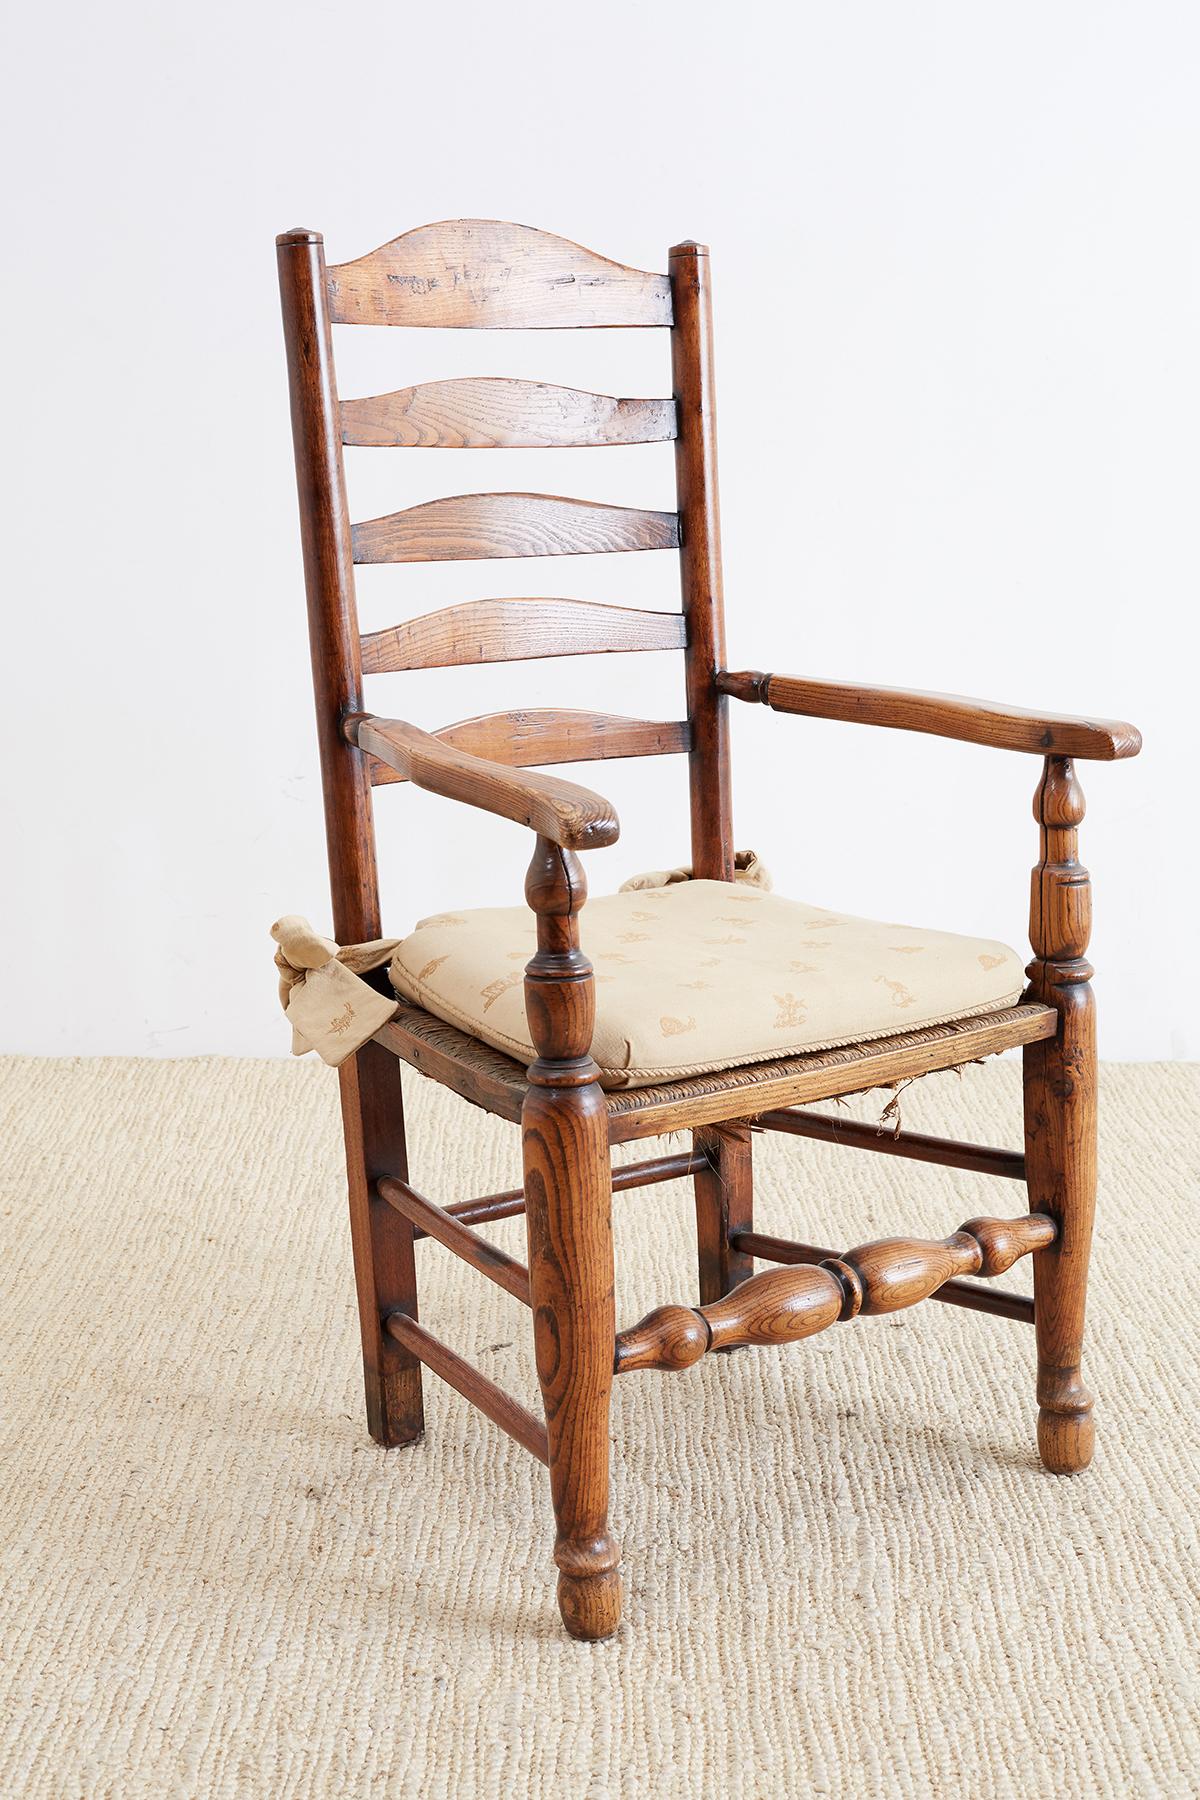 Wood 19th Century English Ladder Back Chair For Sale